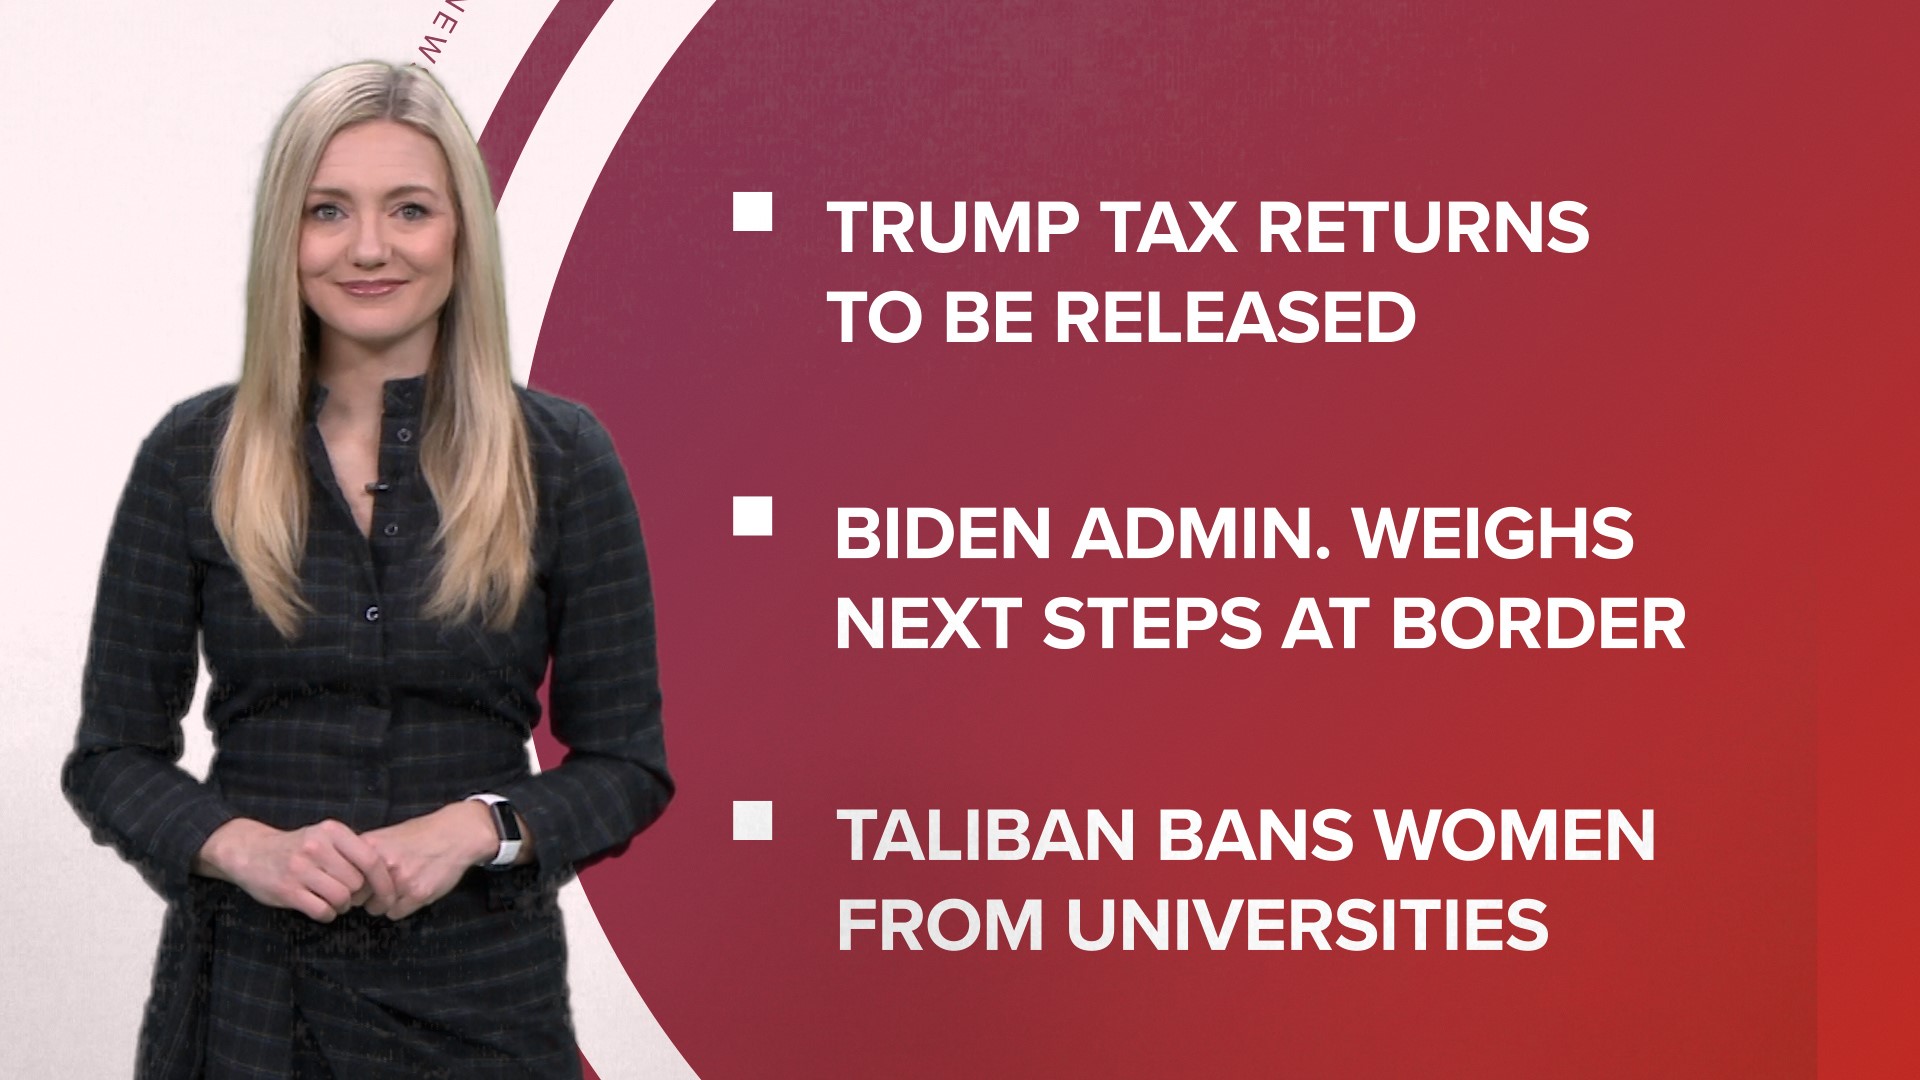 A look at what is happening in the news from Mr. Trump's tax returns to be released to the Taliban banning women from universities and preparing for a winter storm.